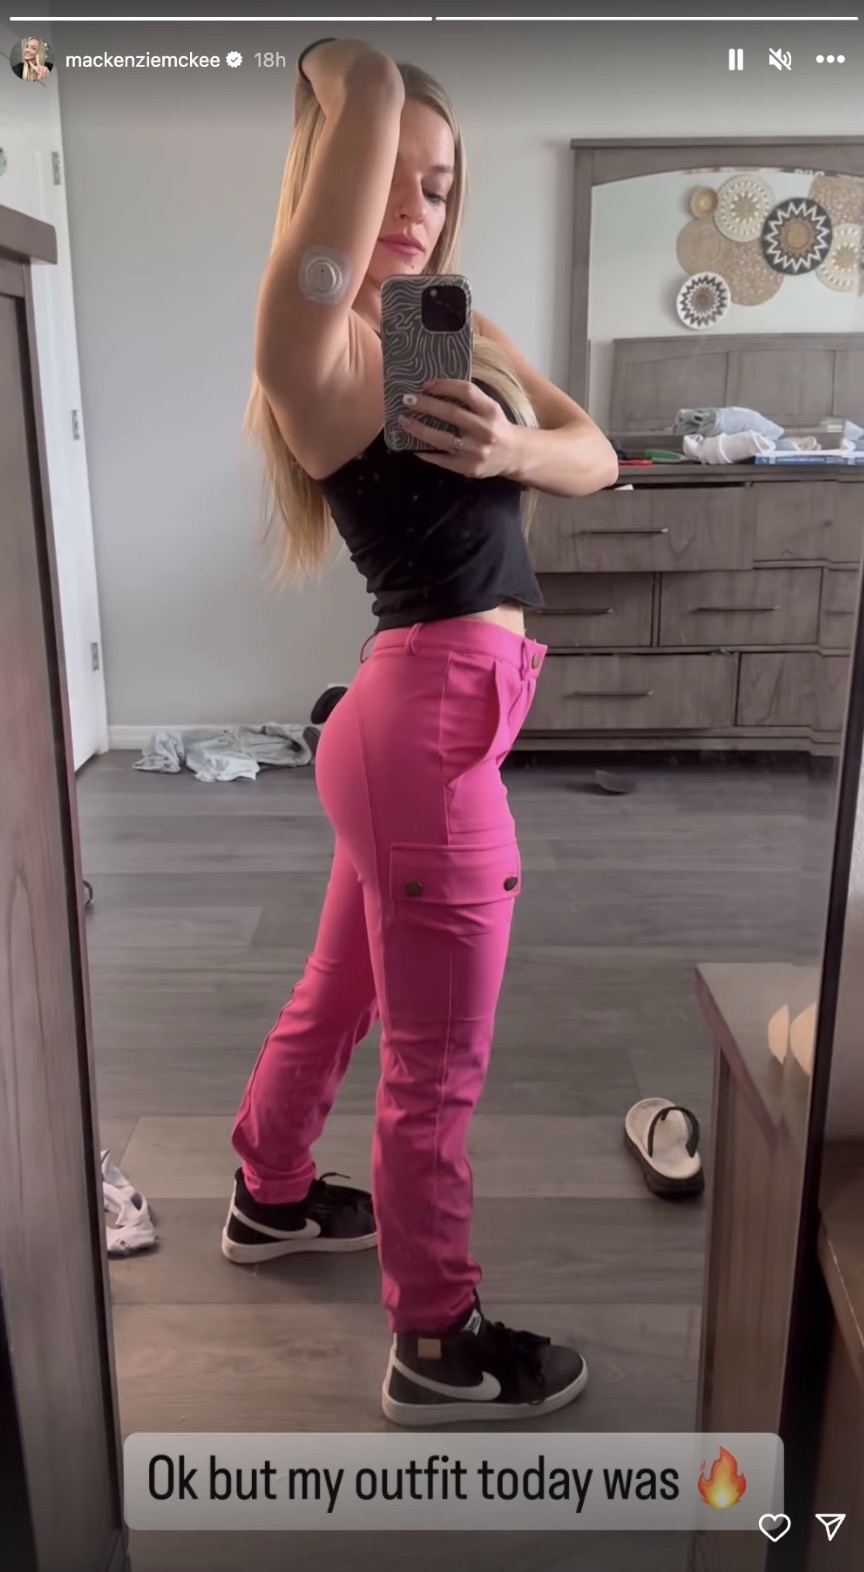 She took a photo of herself in a black tank top and hot pink pants